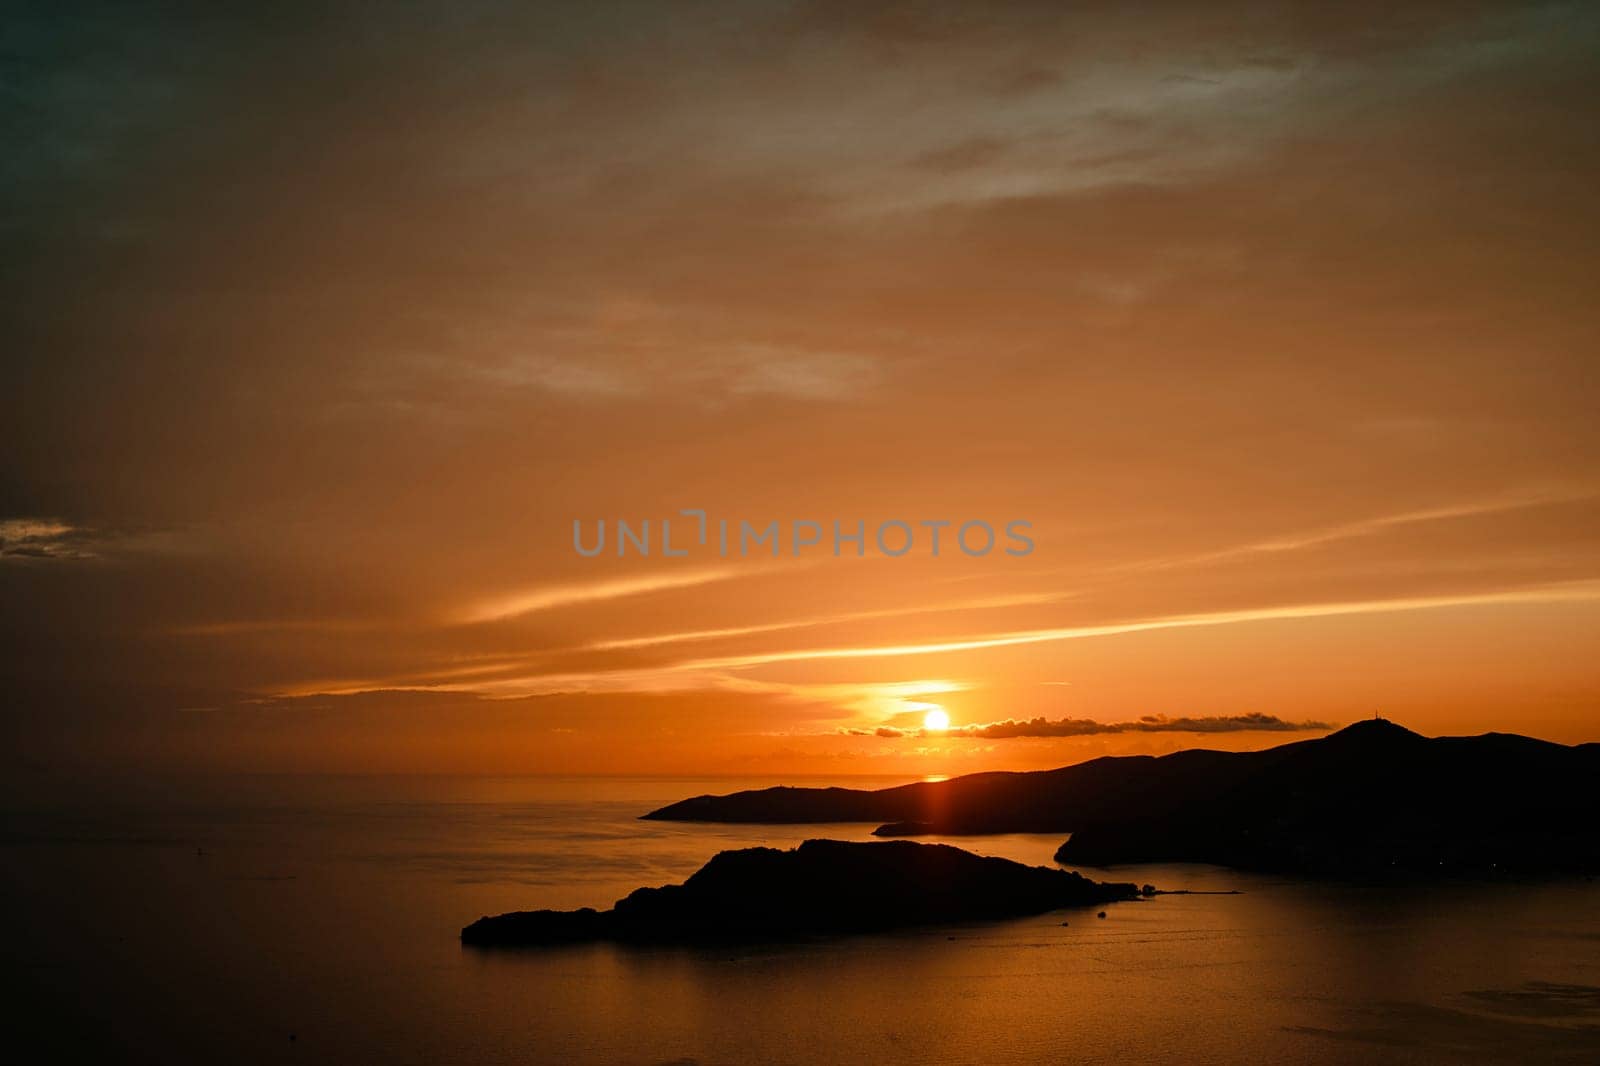 Orange sunset over silhouettes of mountains by the sea. High quality photo